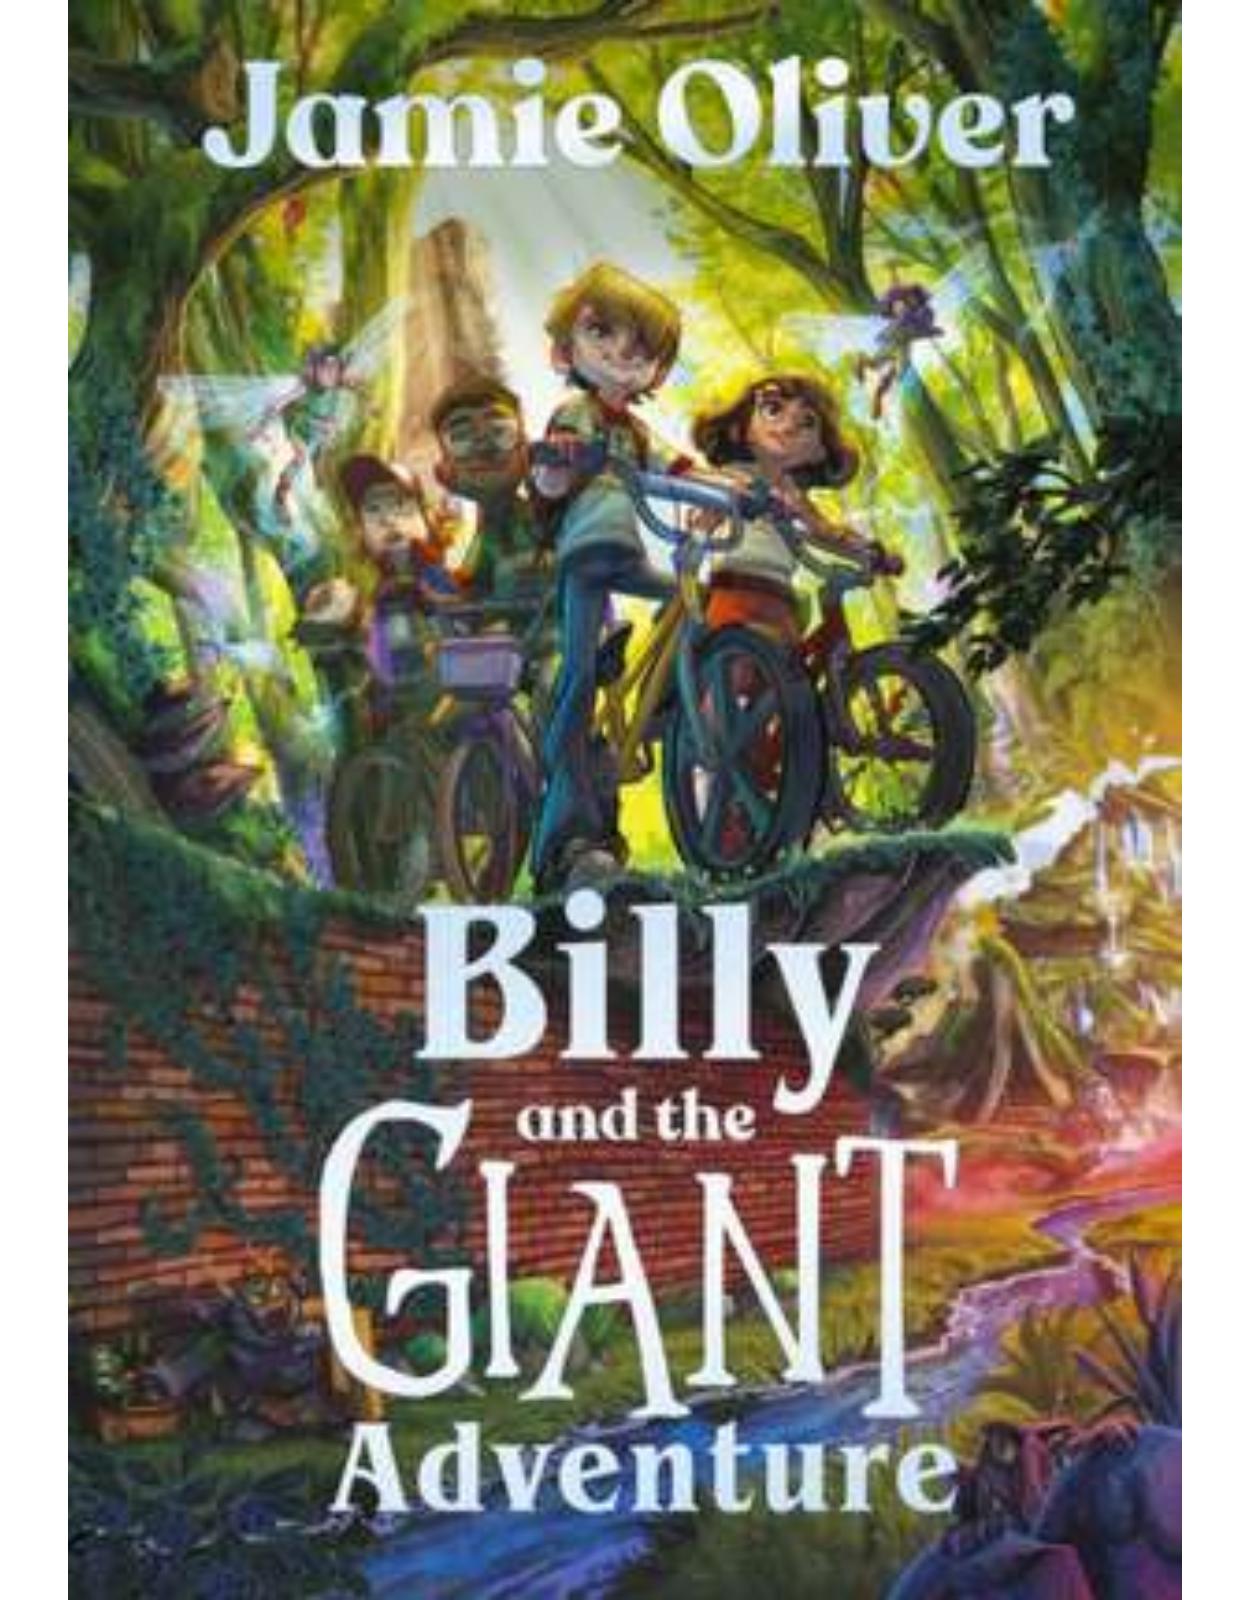 Billy and the Giant Adventure